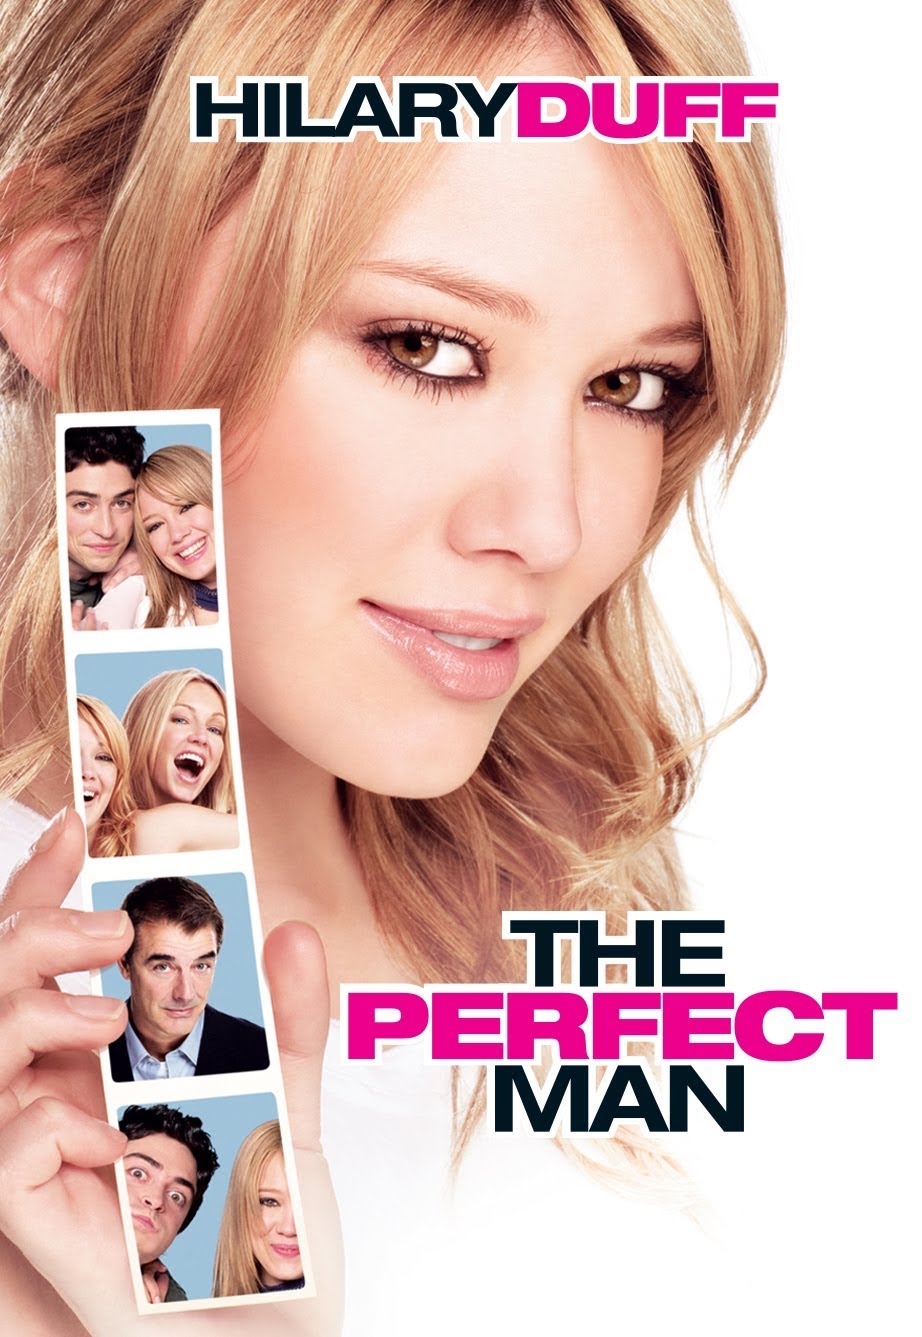 The Perfect man [HD] (2005)